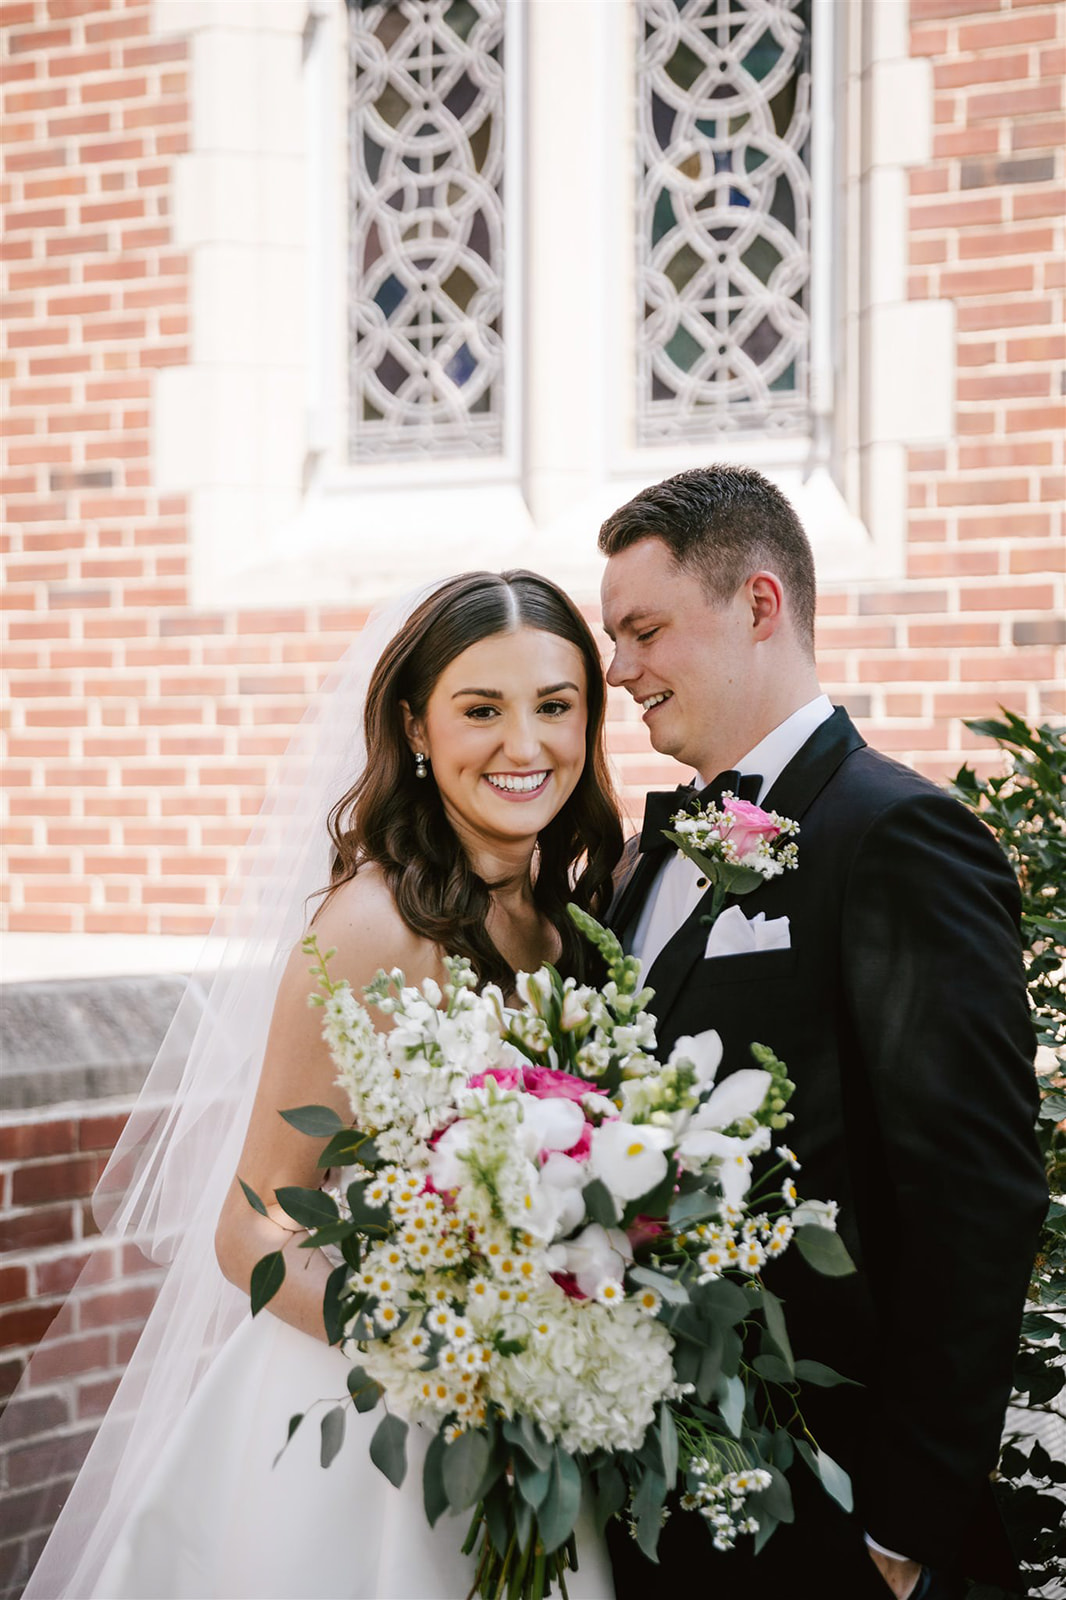 The bride and groom stand in the courtyard, with a bouquet of pink, white, and yellow flowers, creating a vibrant scene.